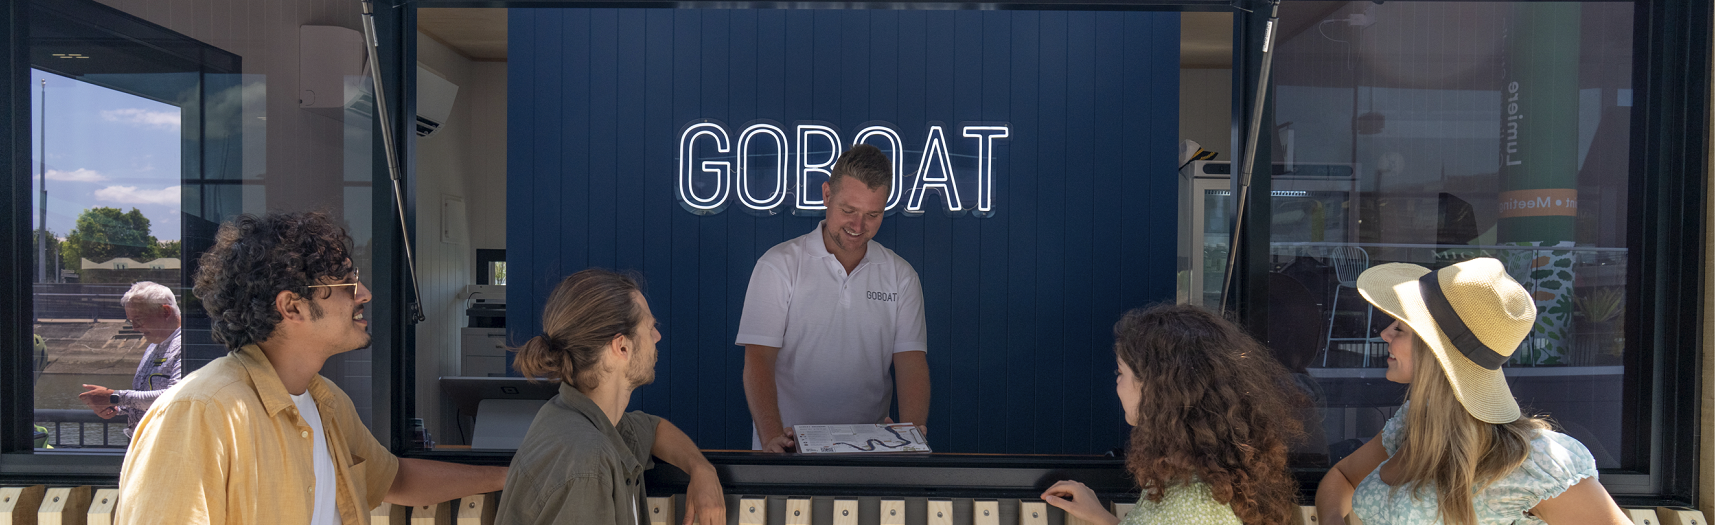 Man standing in front of GOBOAT sign talking to customers